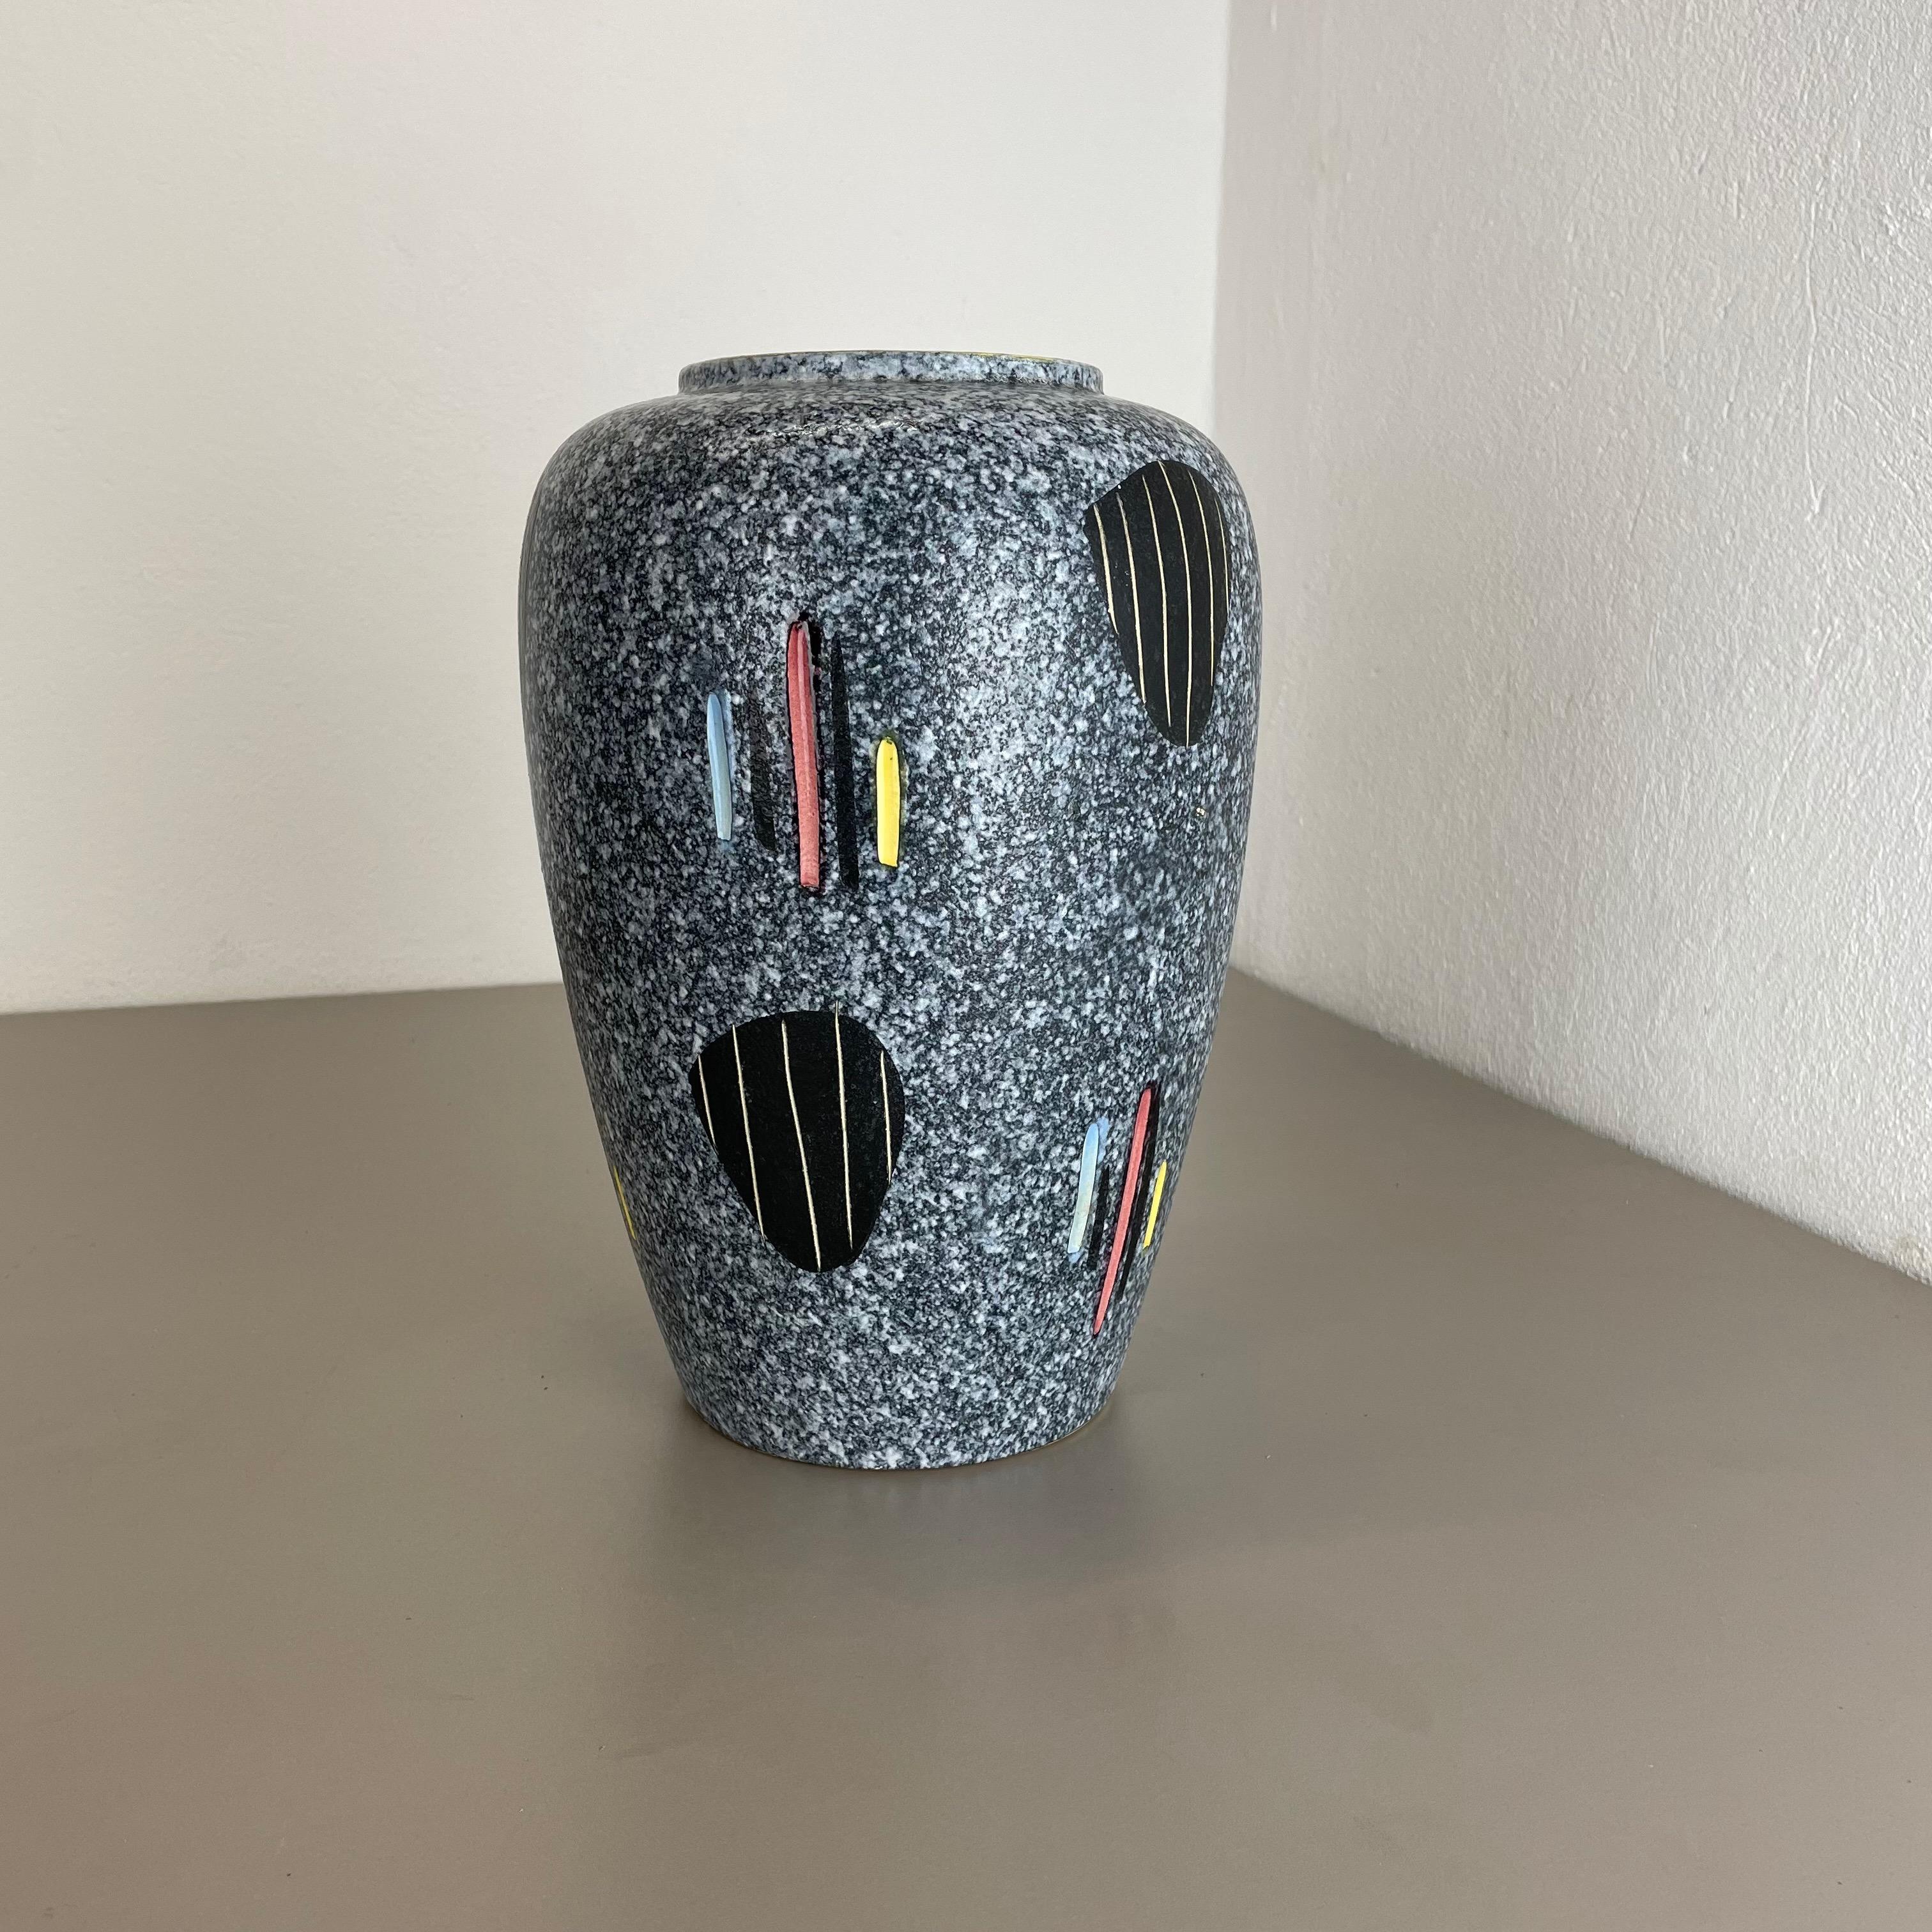 Article:

Pottery ceramic vase


Producer:

Scheurich FOREIGN Ceramic, Germany


Decade:

1960s





Original vintage 1960s pottery ceramic vase made in Germany. High quality German production with a nice abstract illustration and